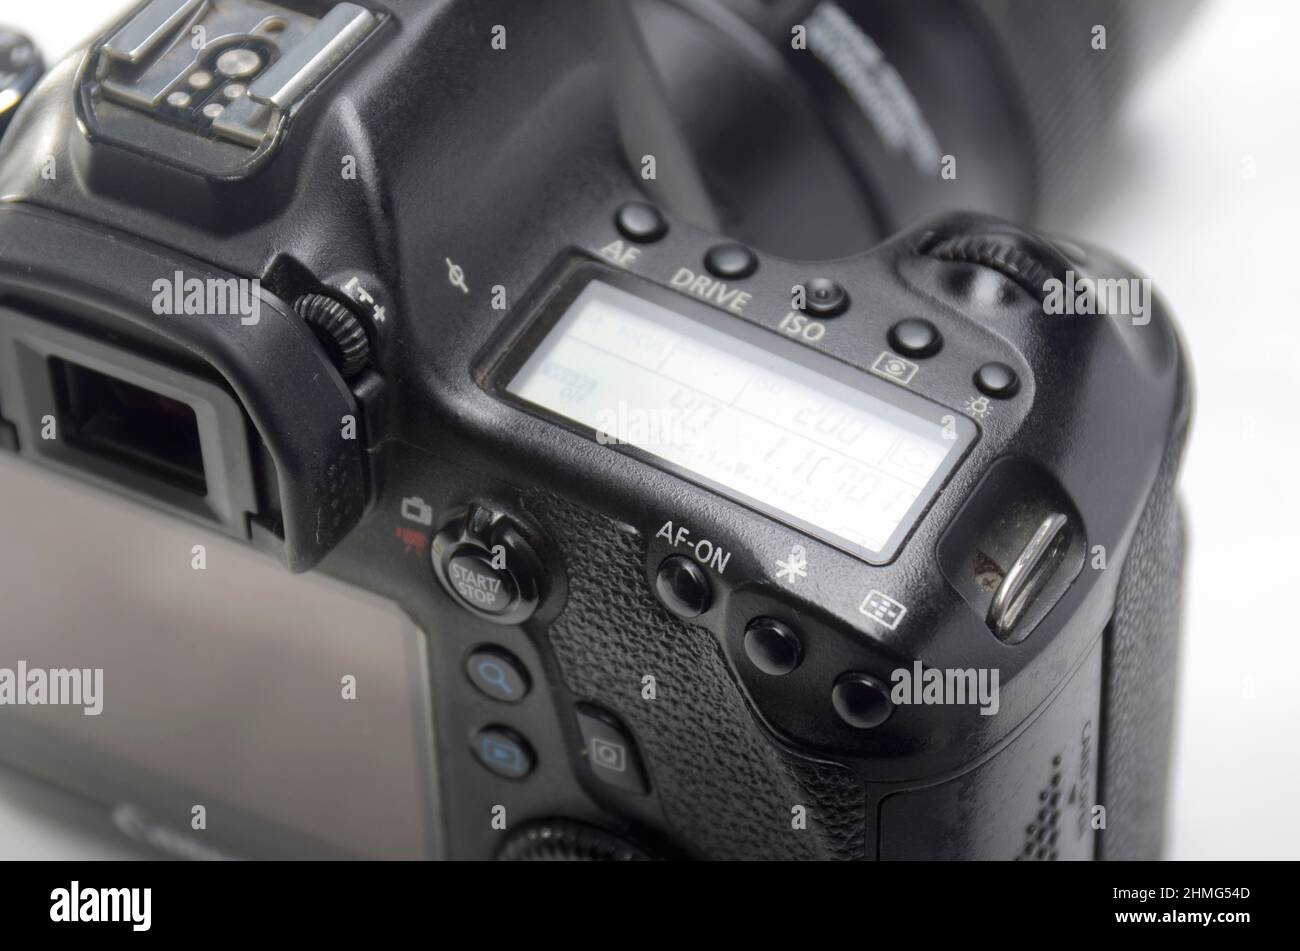 Making Picture with Digital SLR Camera Canon EOS 6D with Canon Lens 100mm macro Stock Photo